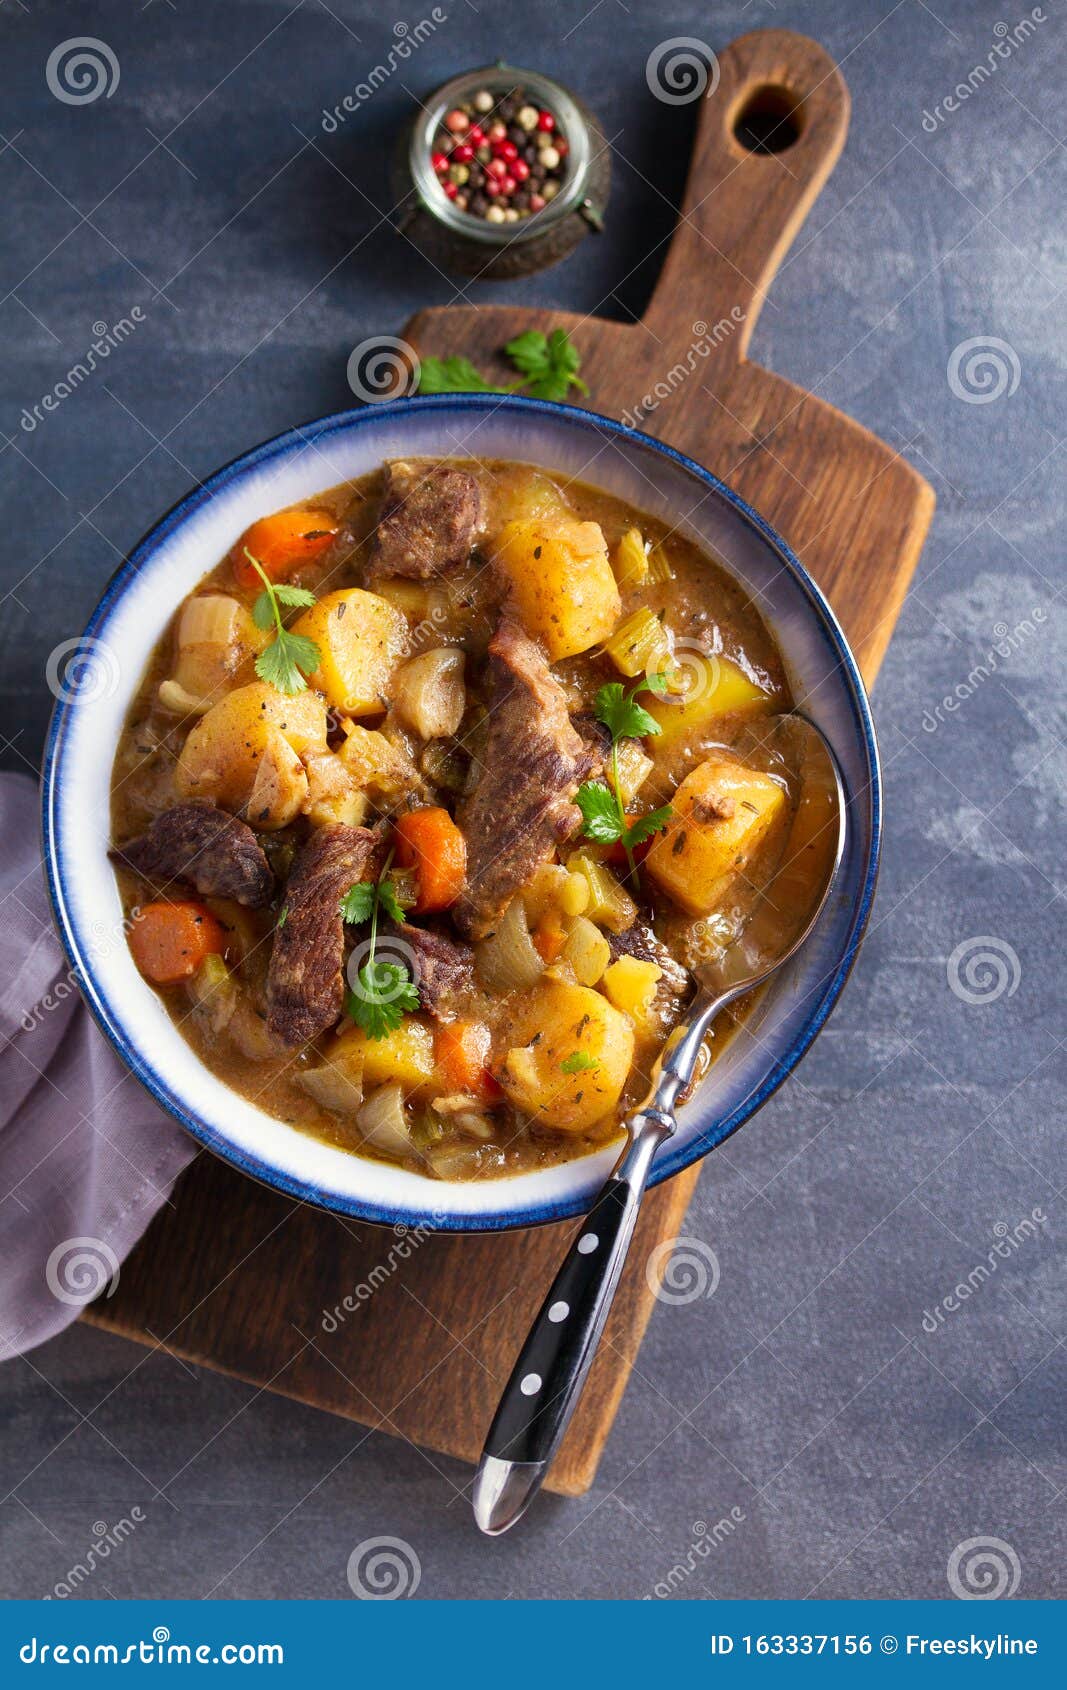 Slow Cooker Thick and Chunky Beef Stew Stock Photo - Image of beer ...